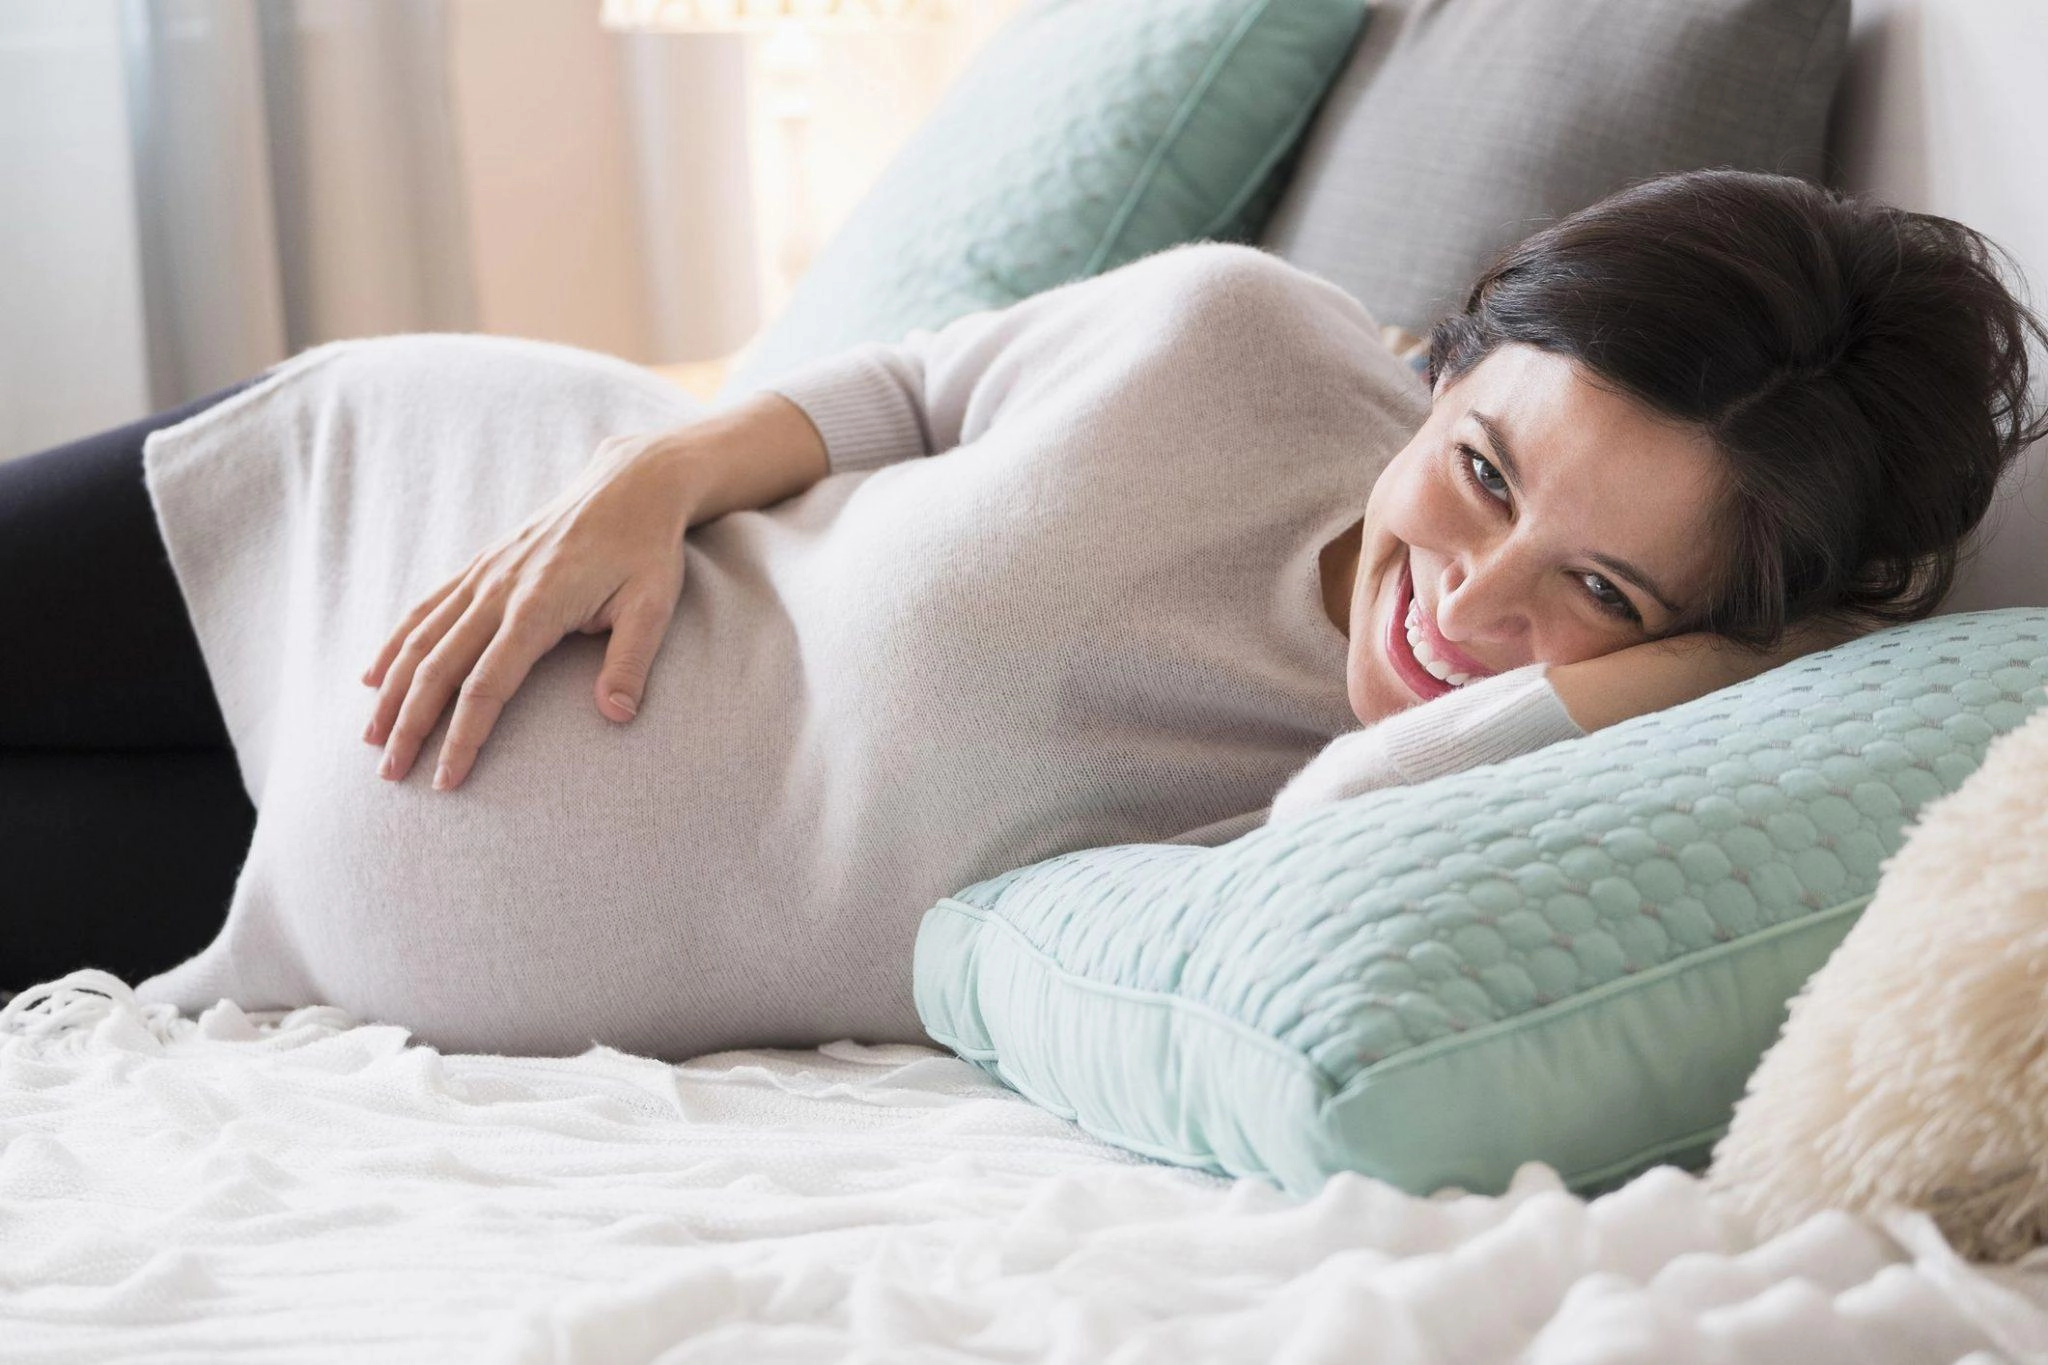 How to Become a Surrogate Mother Georgia?